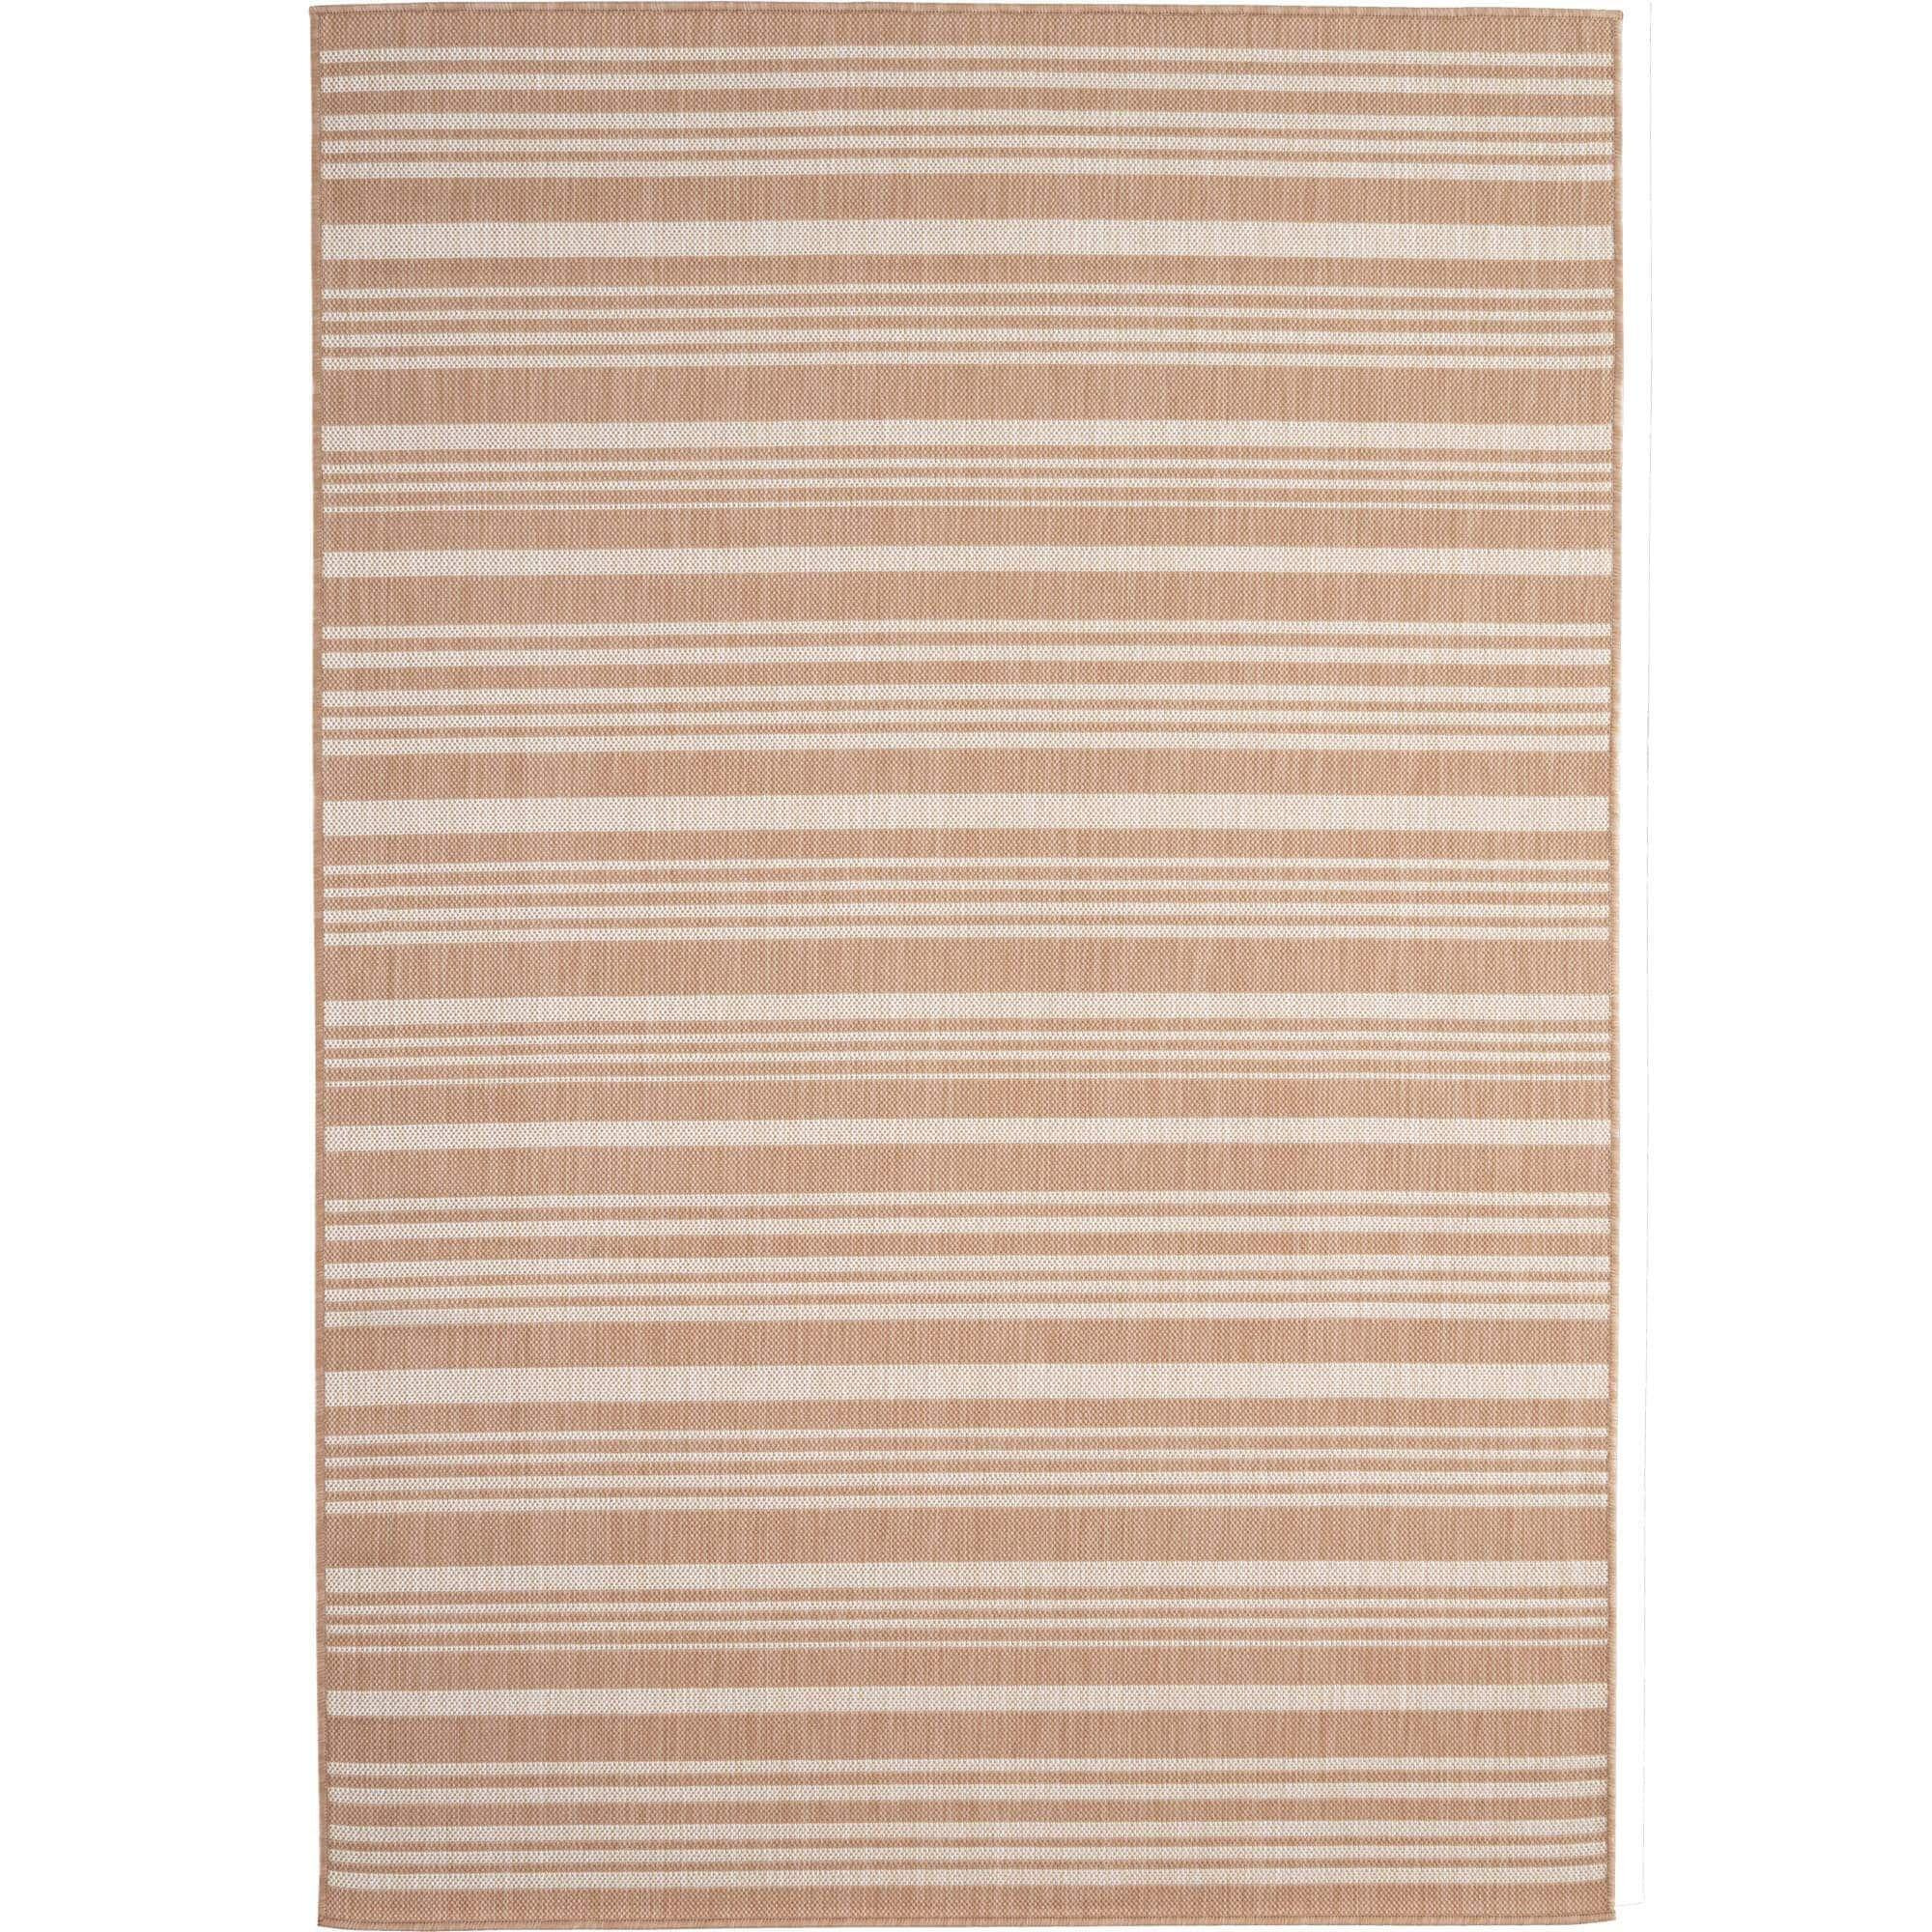 Ecology Collection Outdoor Rugs in Beige - 300b - image 1